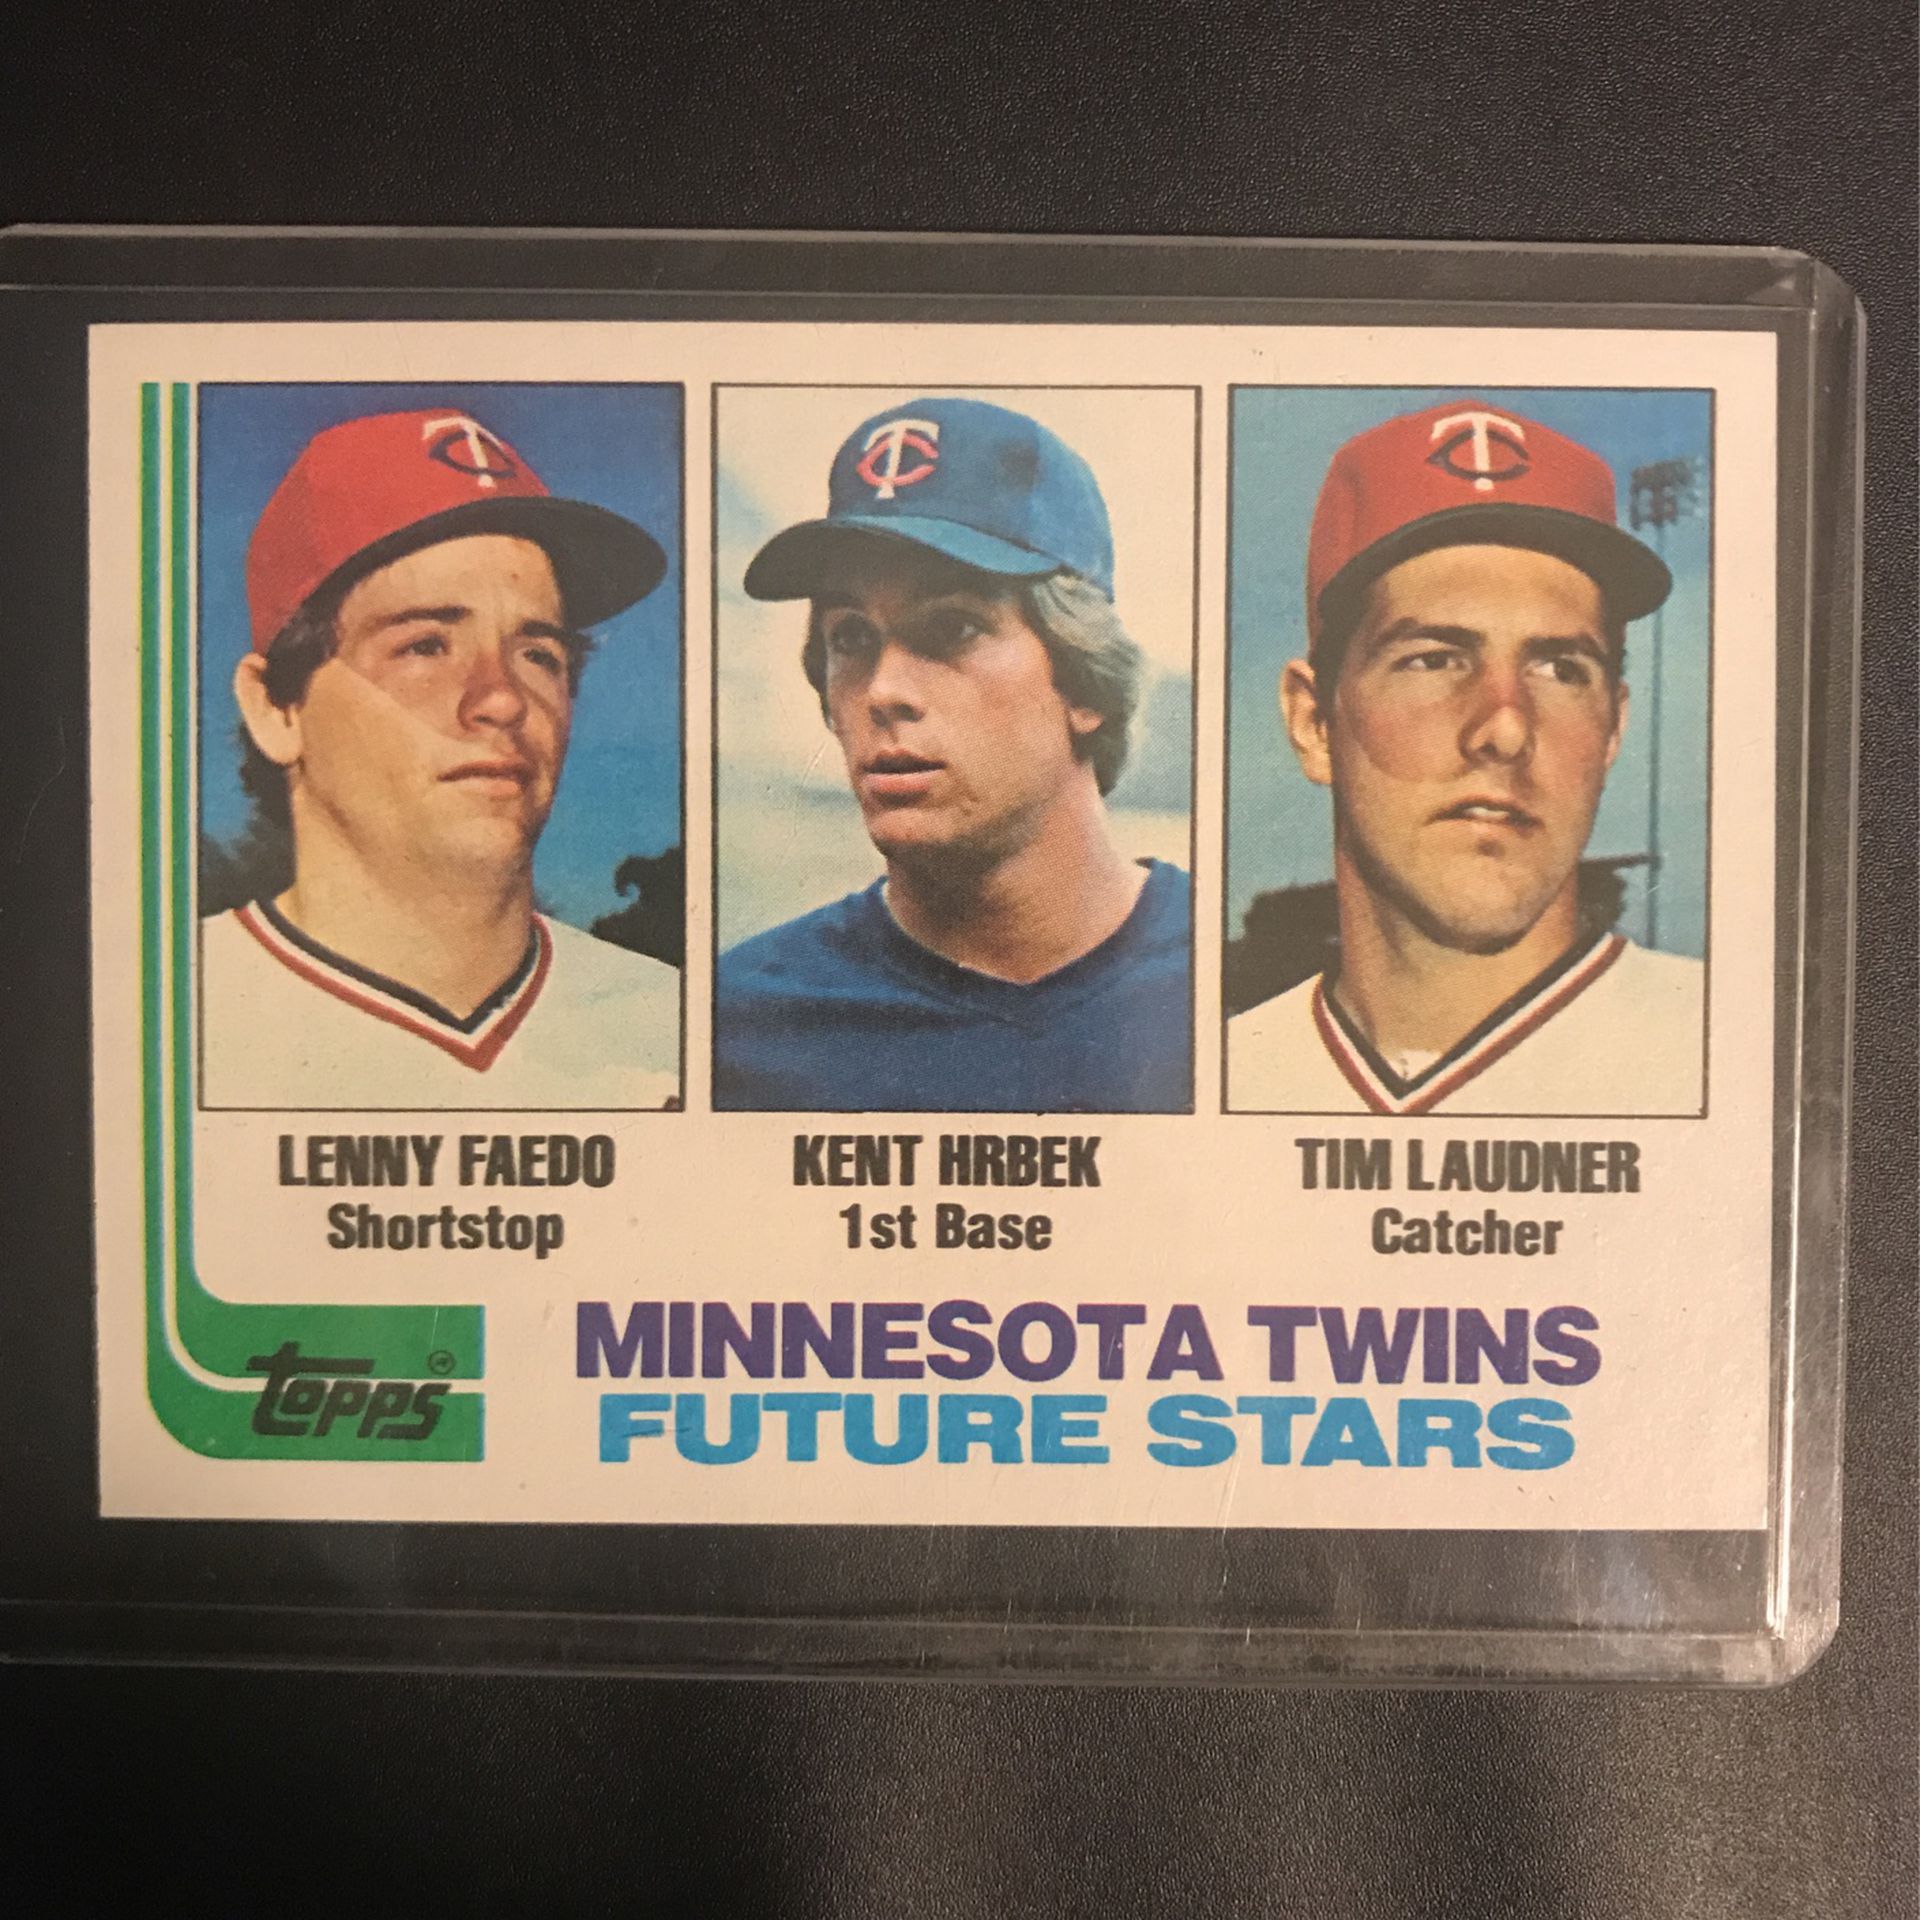 Topps 1982 Kent Hrbek Rookie Baseball Card Minnesota Twins Future Stars  #766 (MINT CONDITION GRADE READY for Sale in Hickory, NC - OfferUp